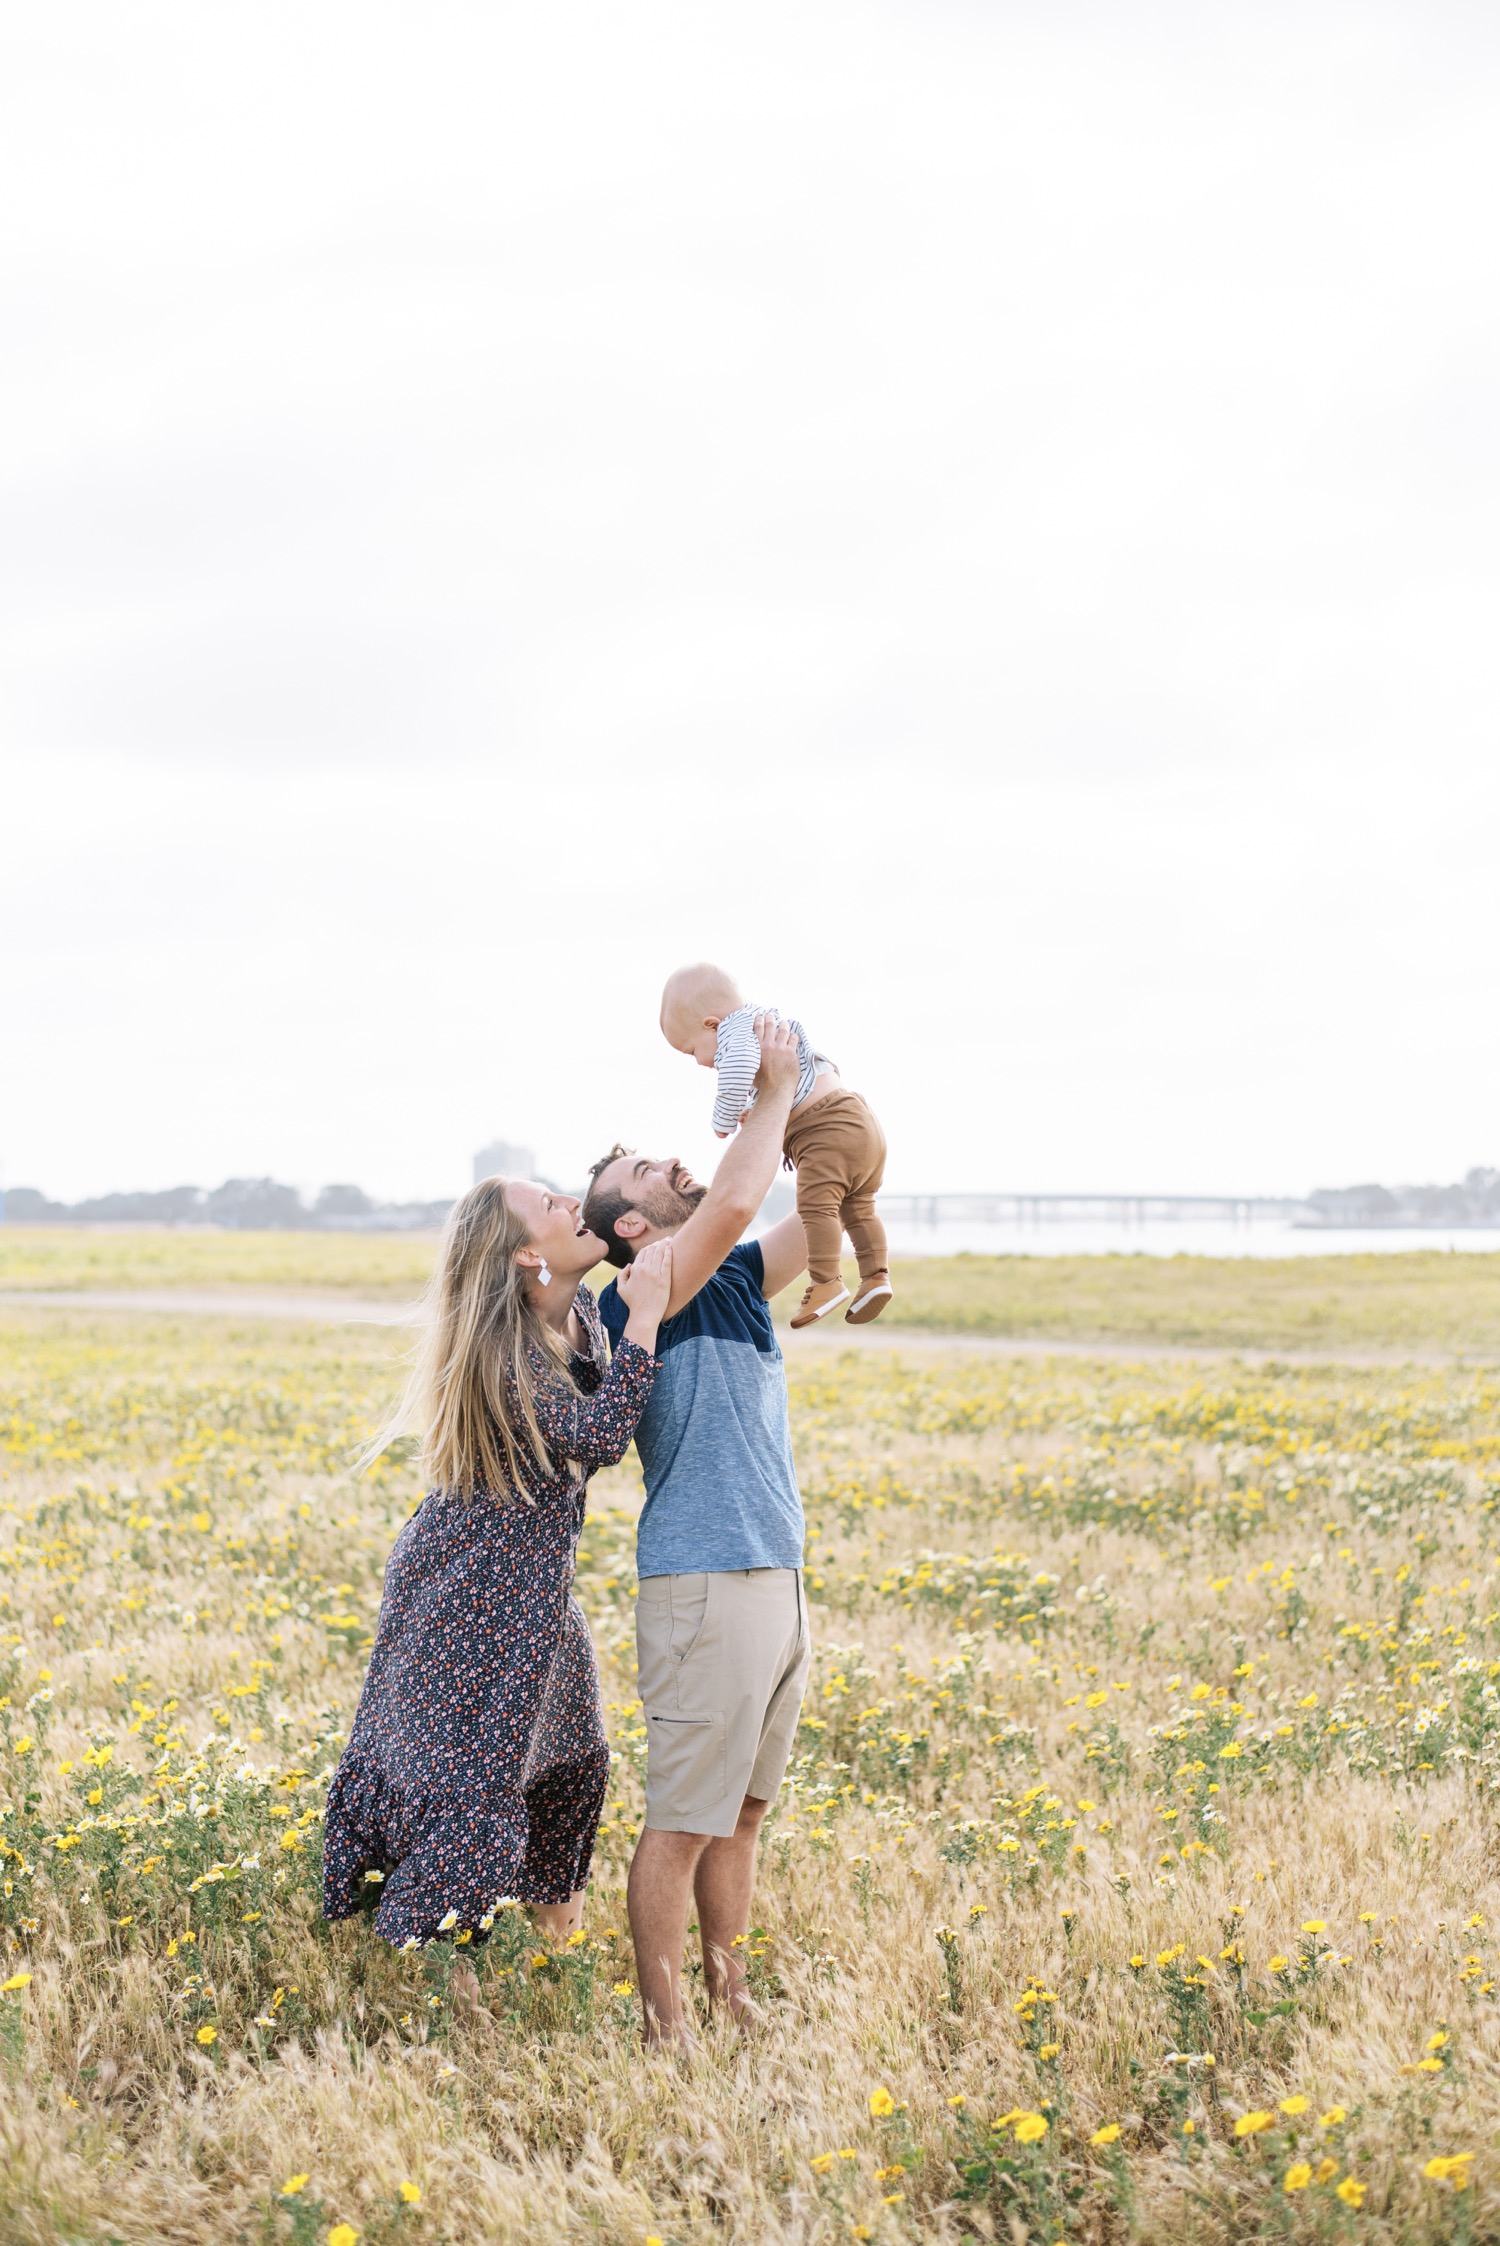 Preserve Precious Moments with Custom New Orleans Family Photography -  Annie Whitaker Photography | Maternity, Newborn, Child and Family  Photographer | New Orleans LA